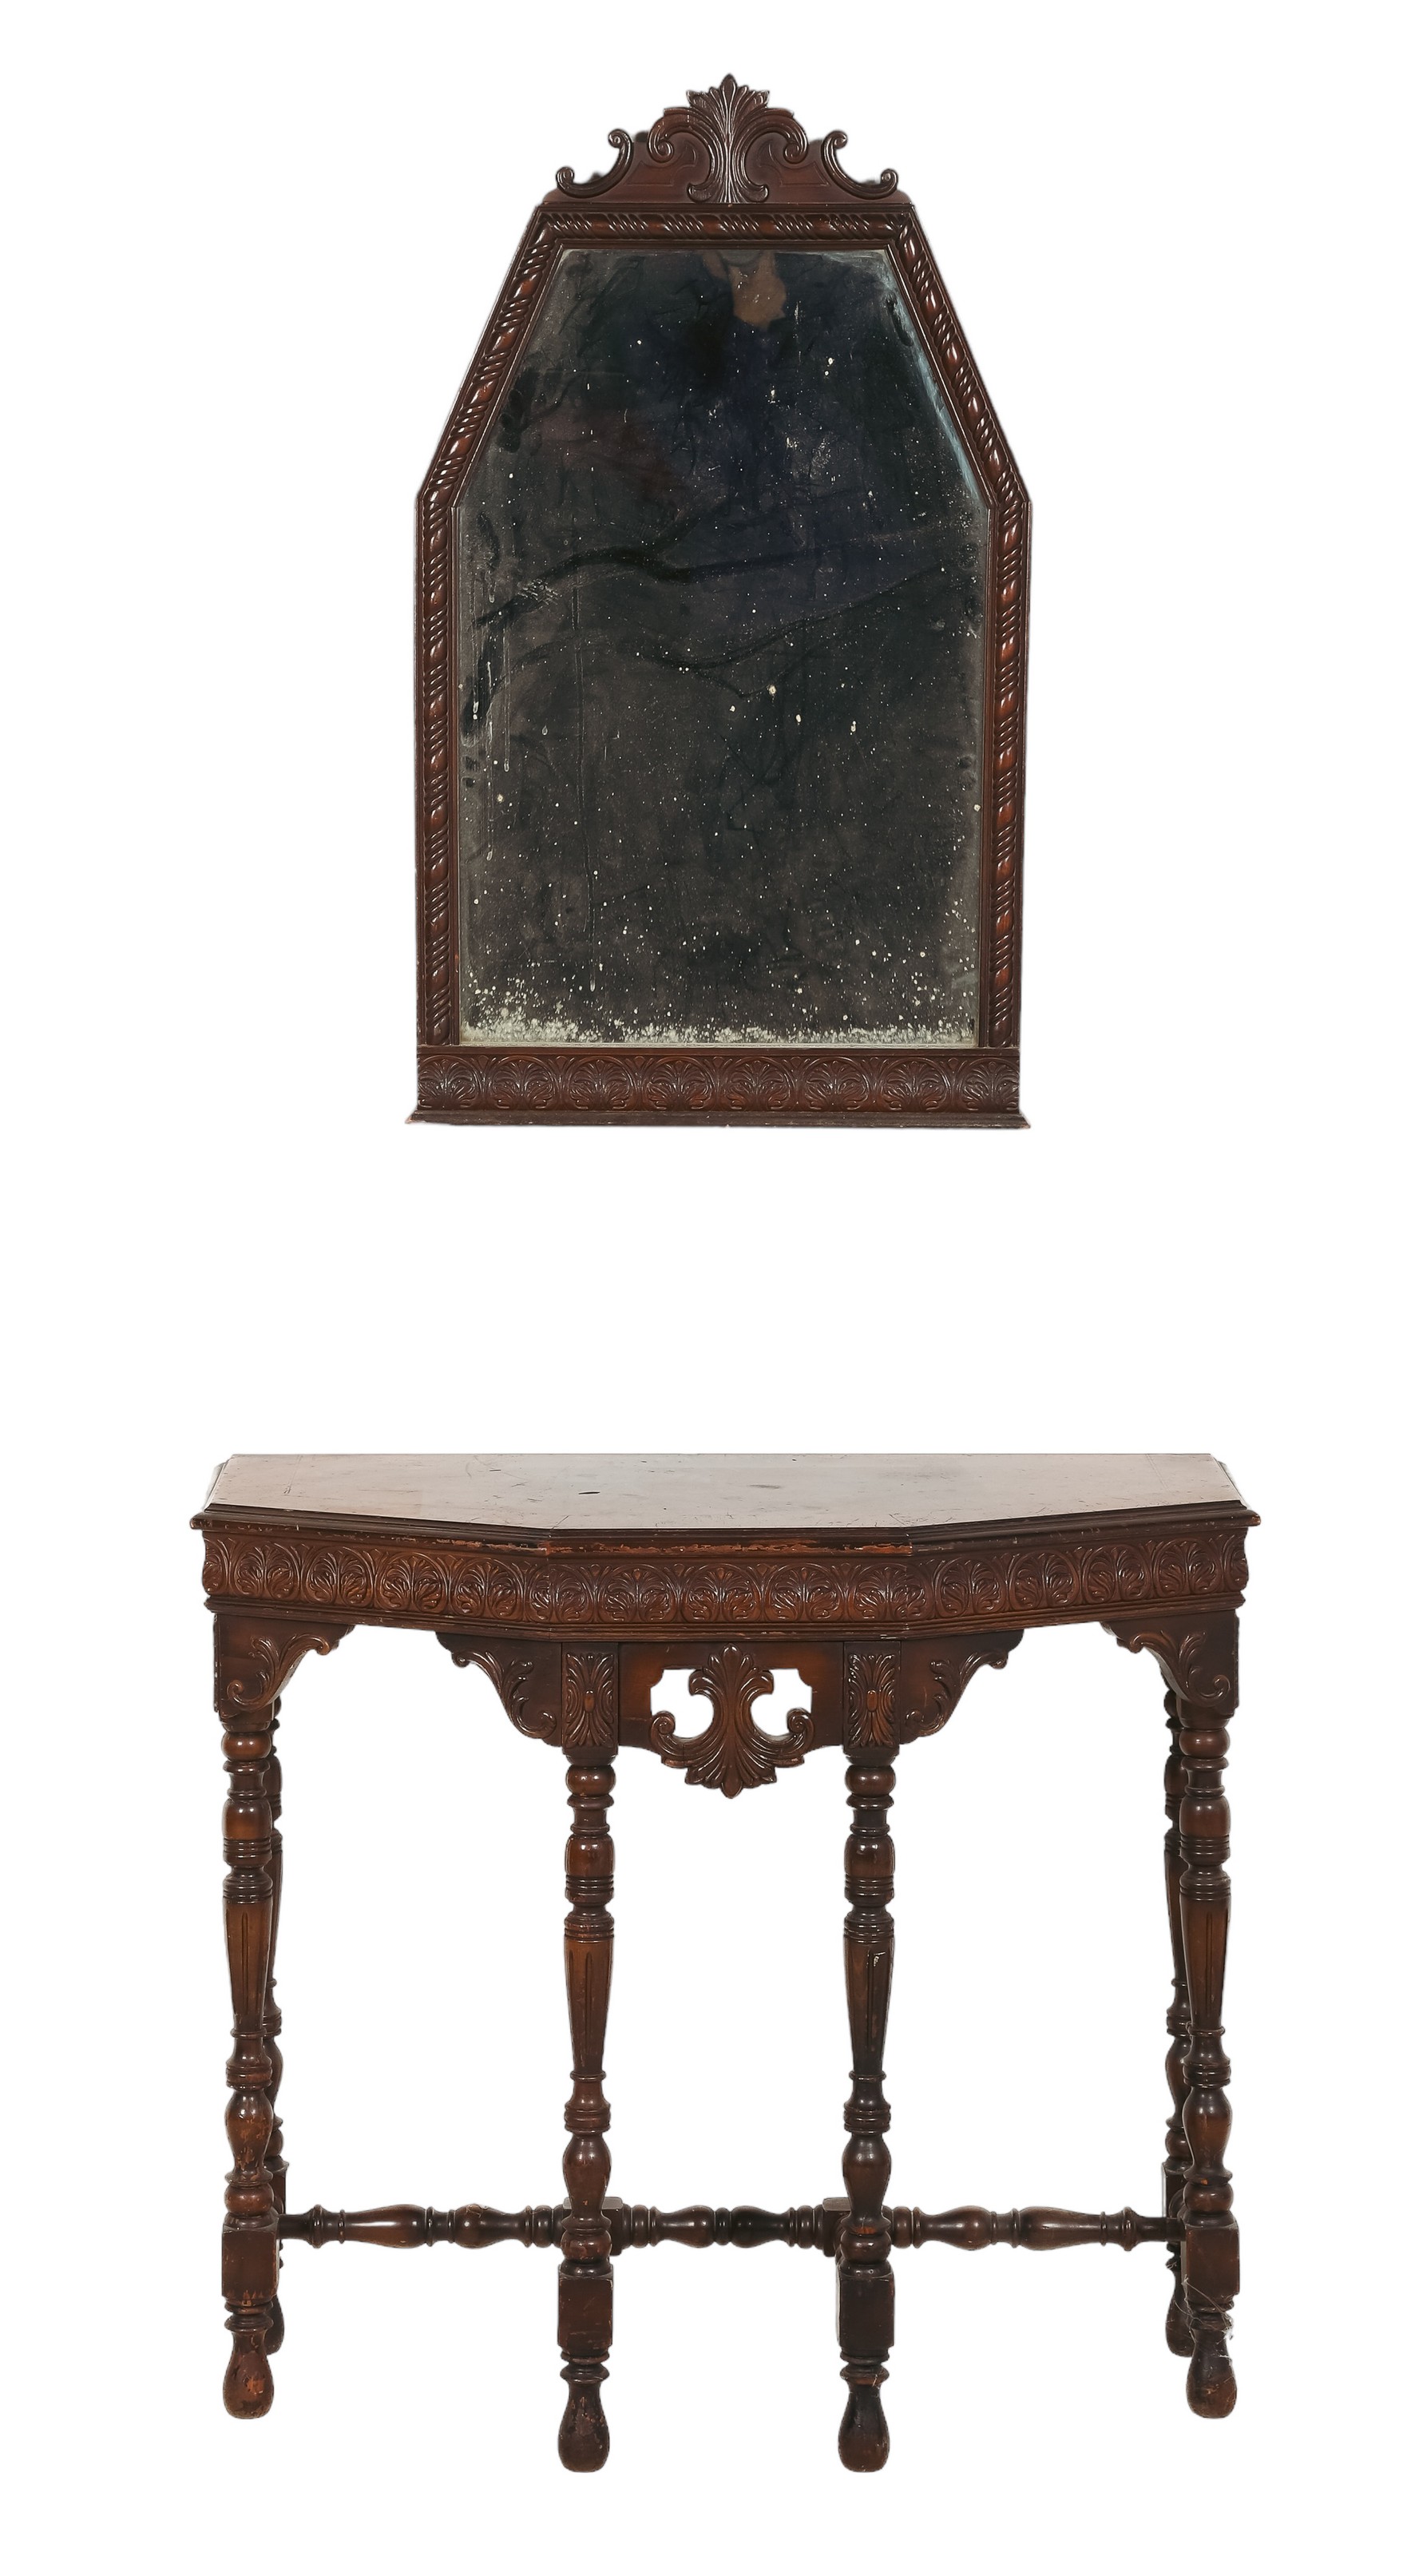 William and Mary style console